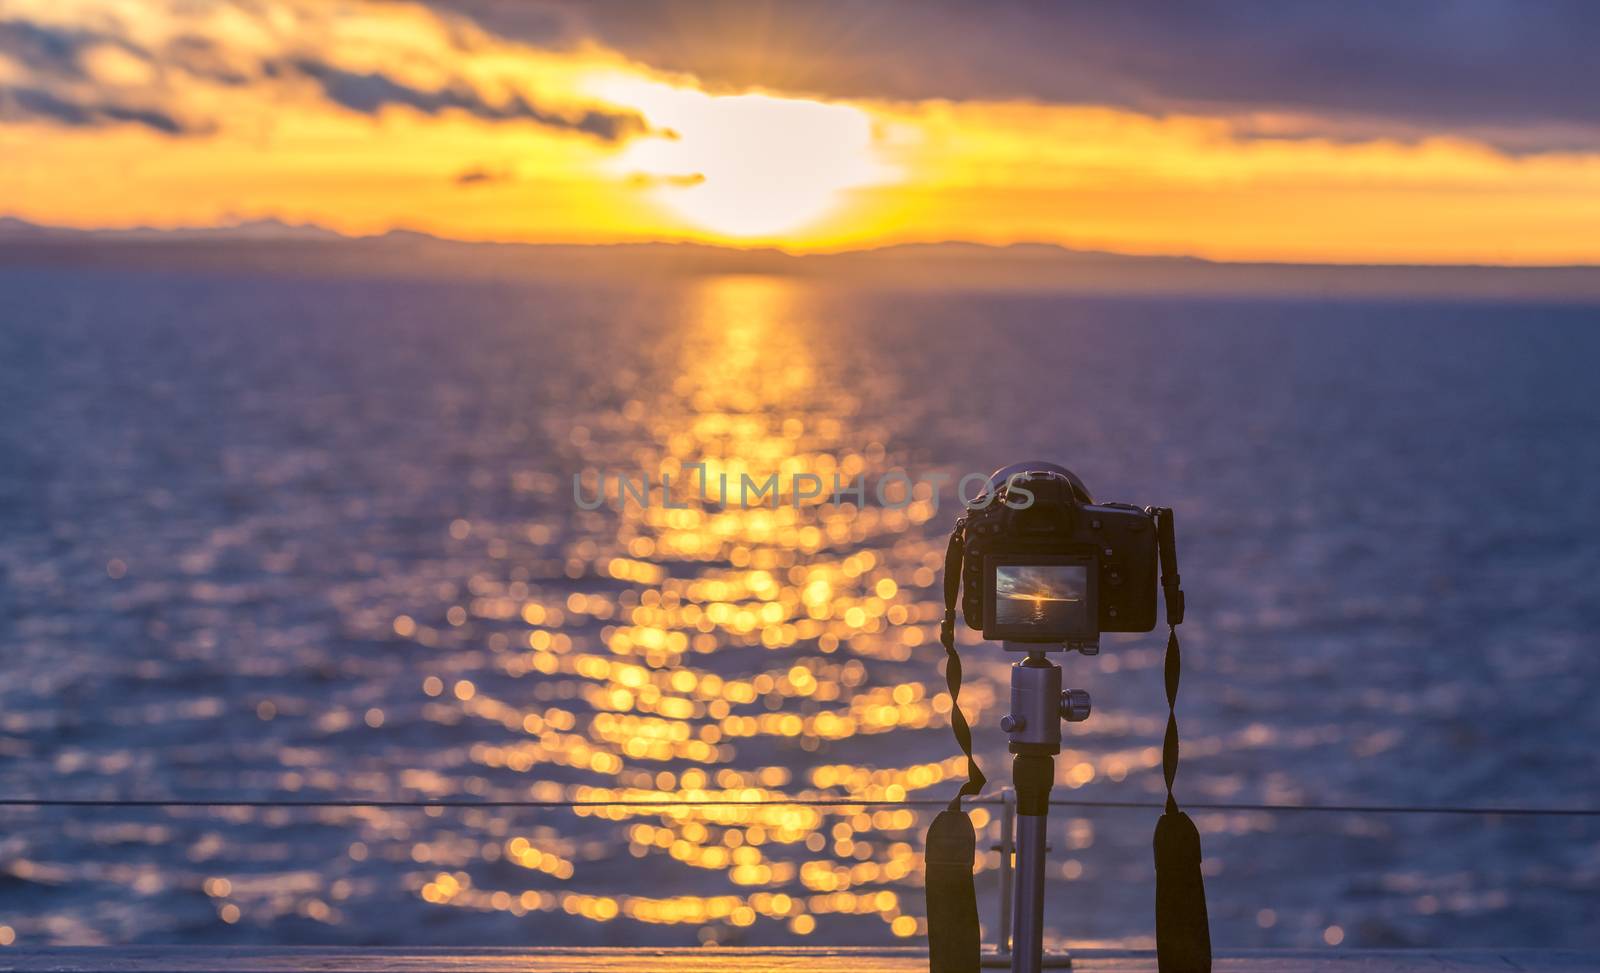 Sunset over water and a DSLR camera  by YesPhotographers